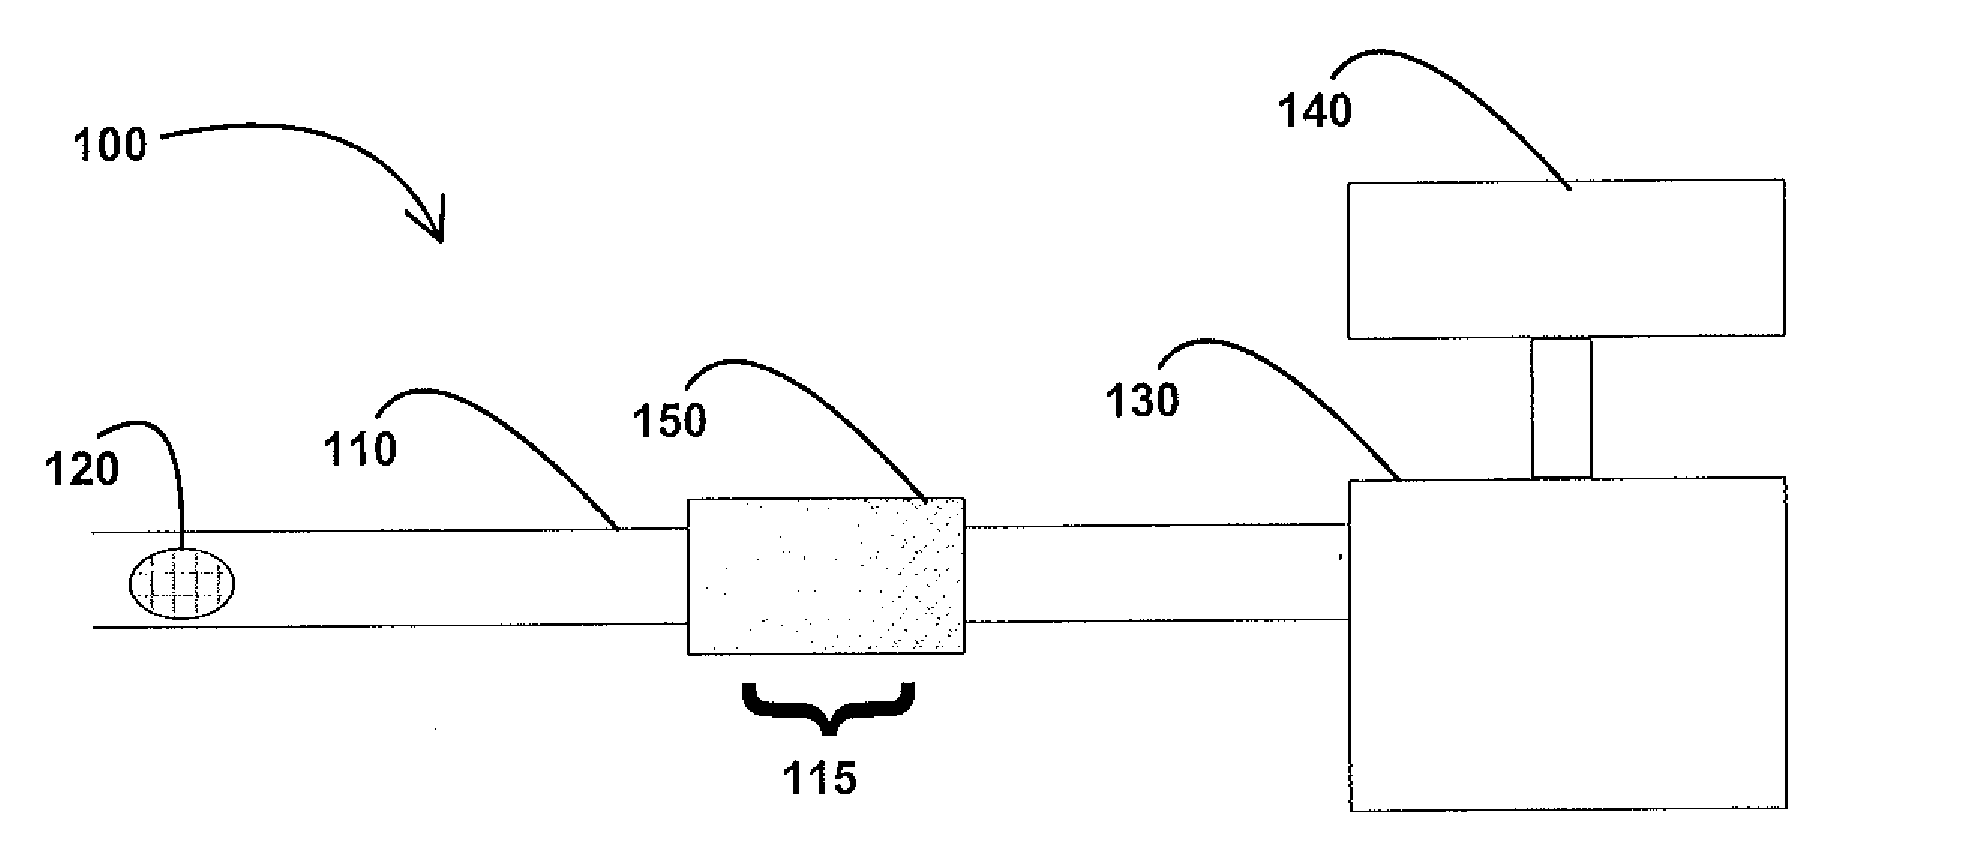 Systems and methods for power and flow rate control